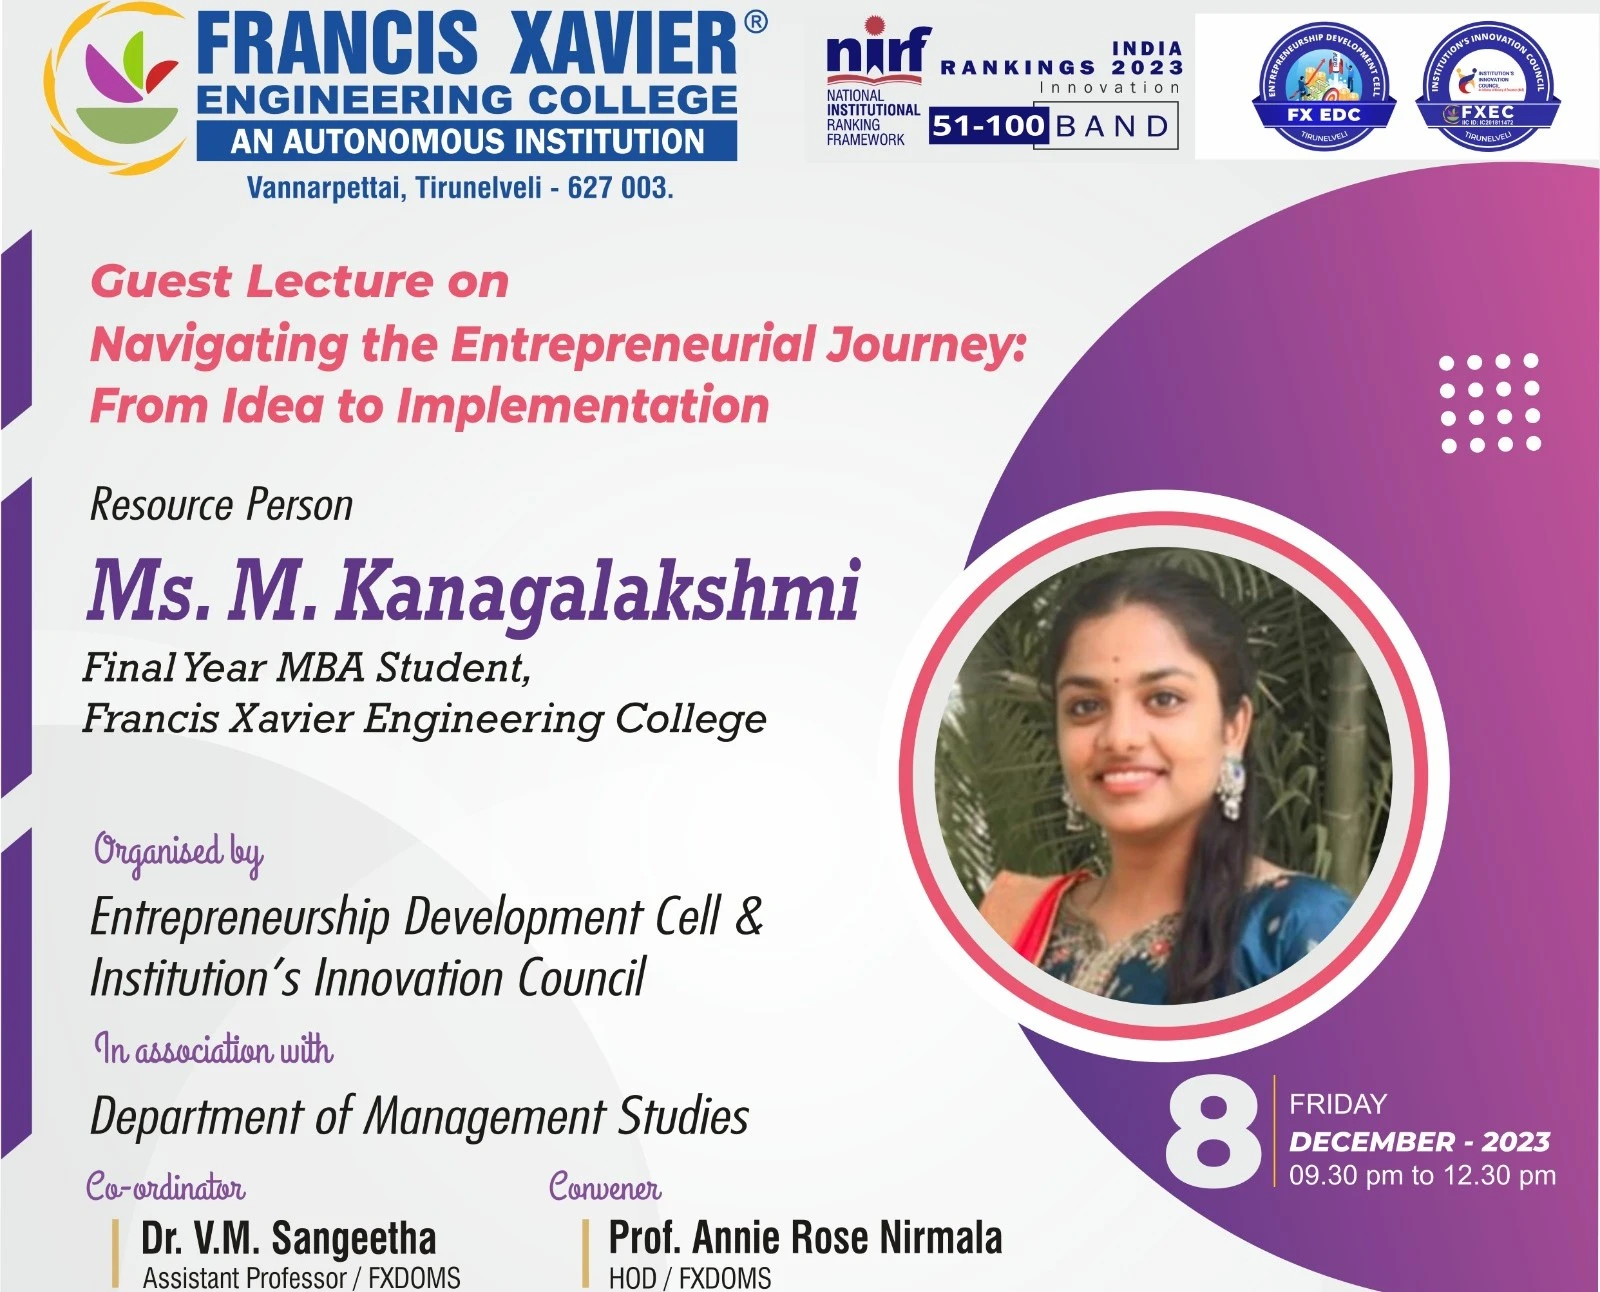 Guest Lecture on Navigating the Entrepreneurial Journey: From Idea to Implementation